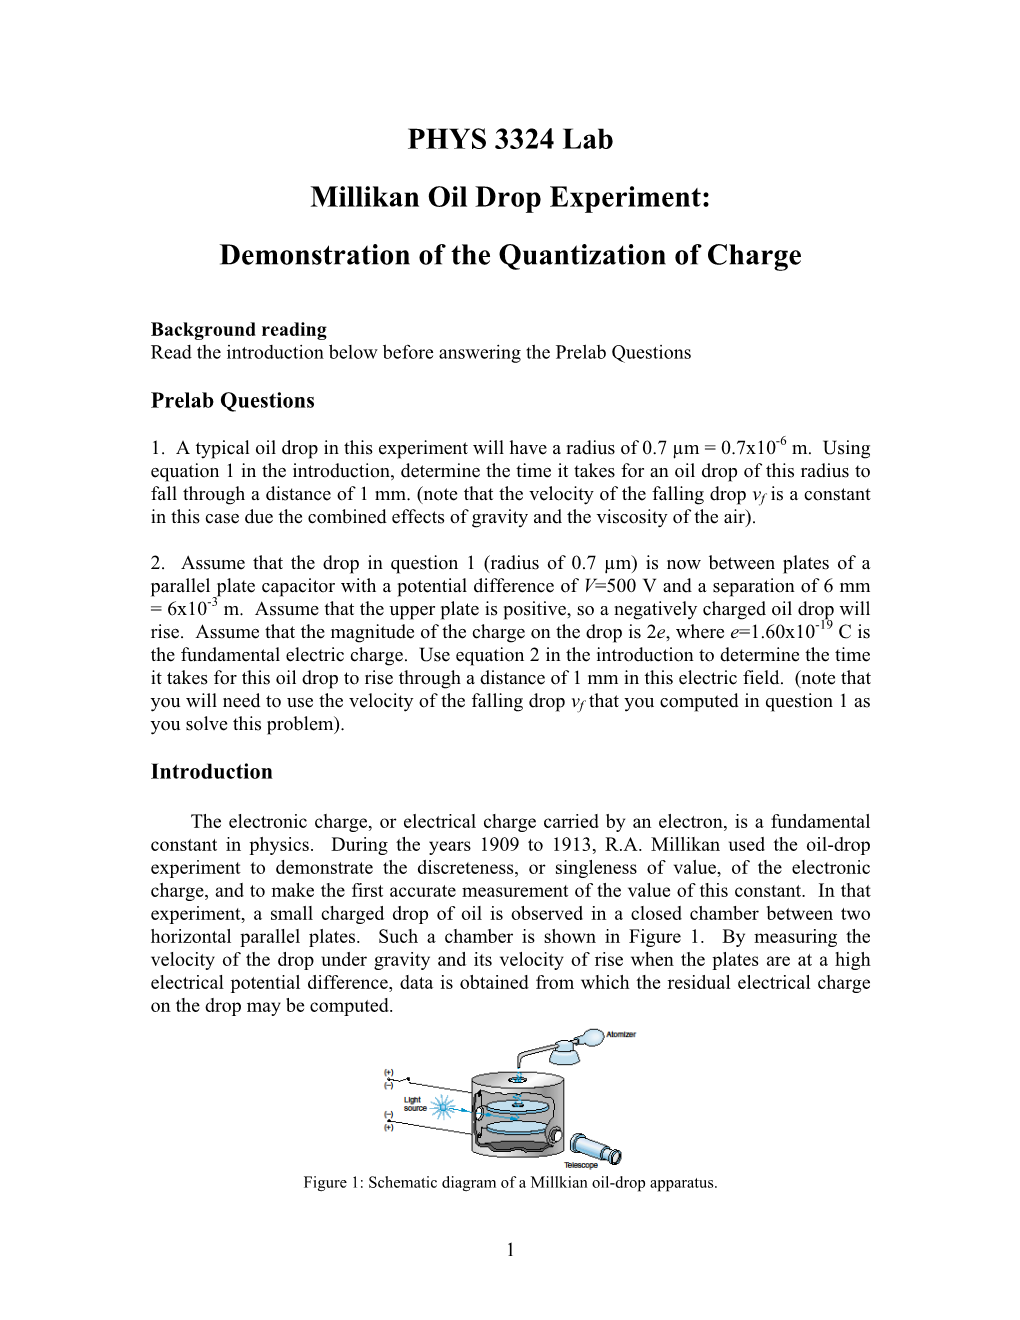 PHYS 3324 Lab Millikan Oil Drop Experiment: Demonstration of the Quantization of Charge